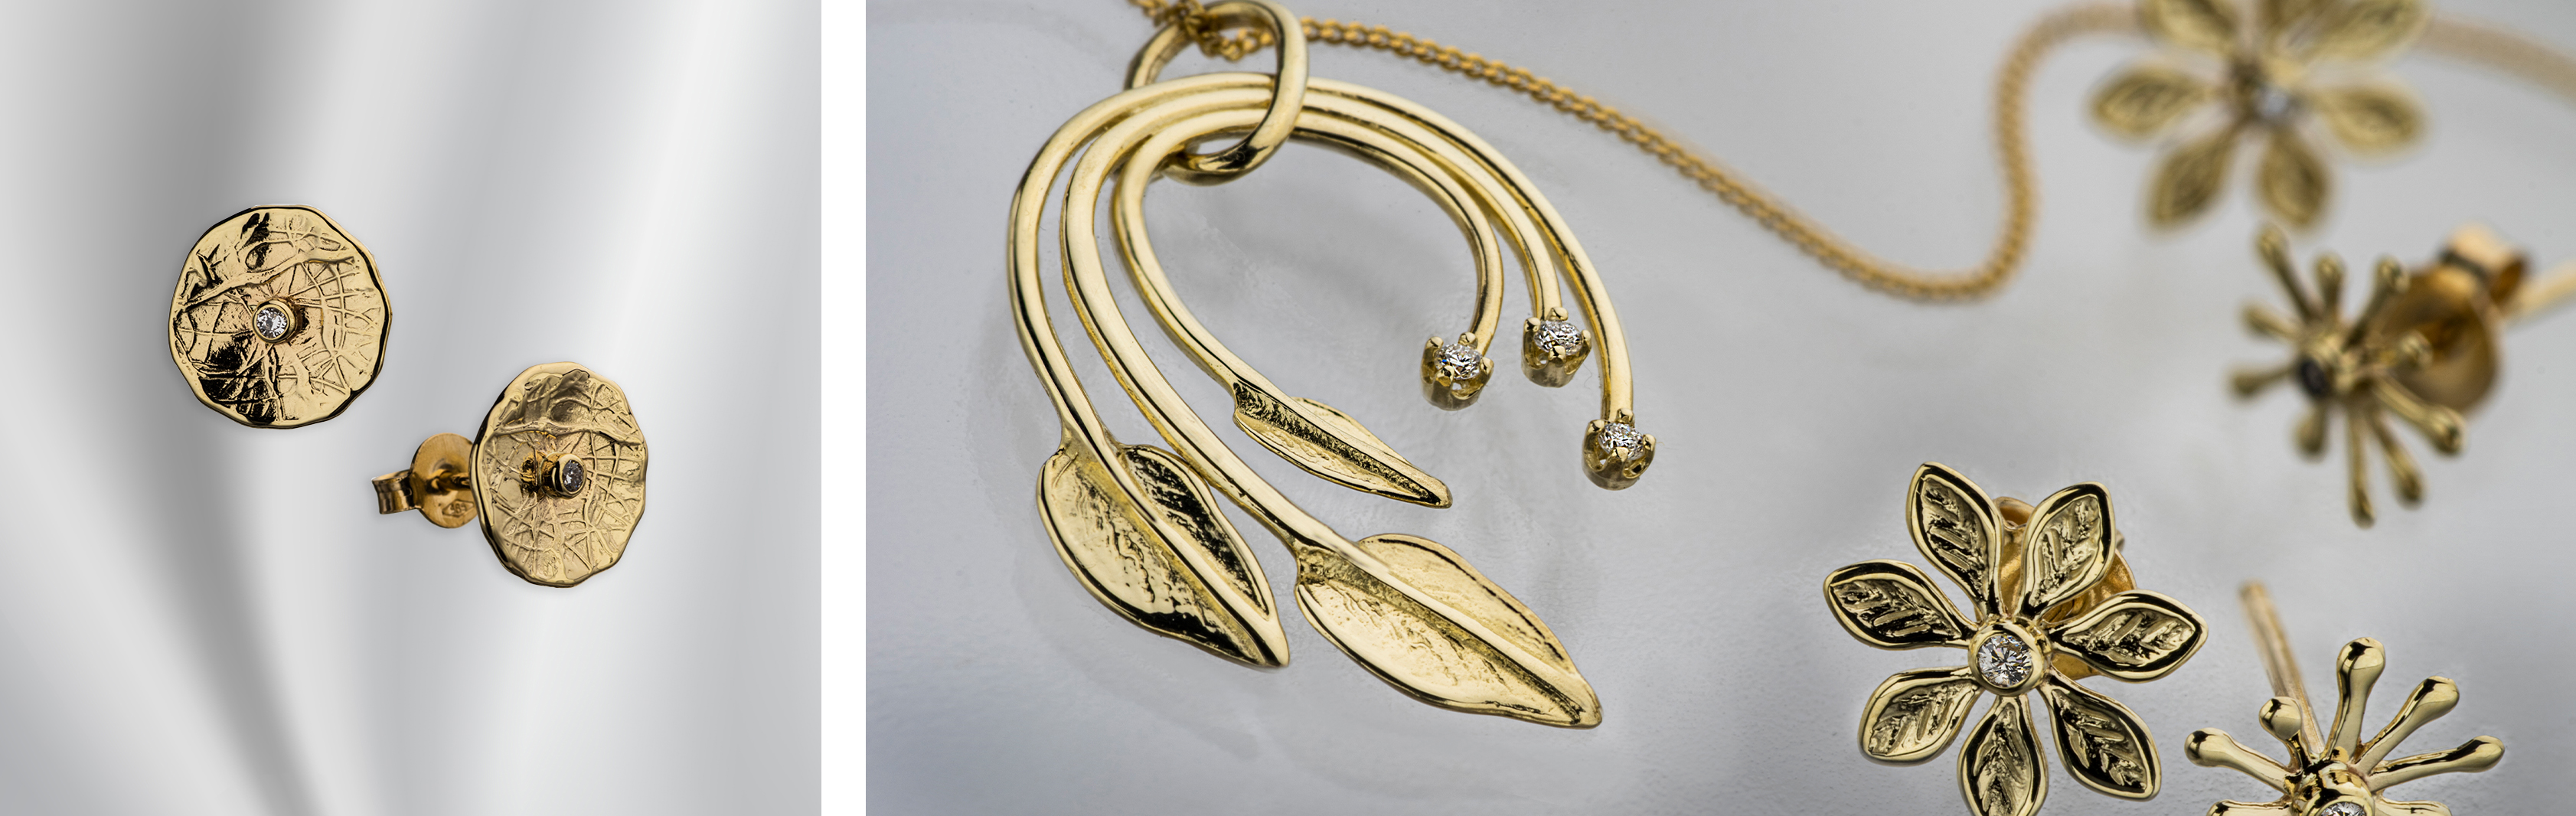 Sunrise Collection | 14K Gold and Diamond Jewelry